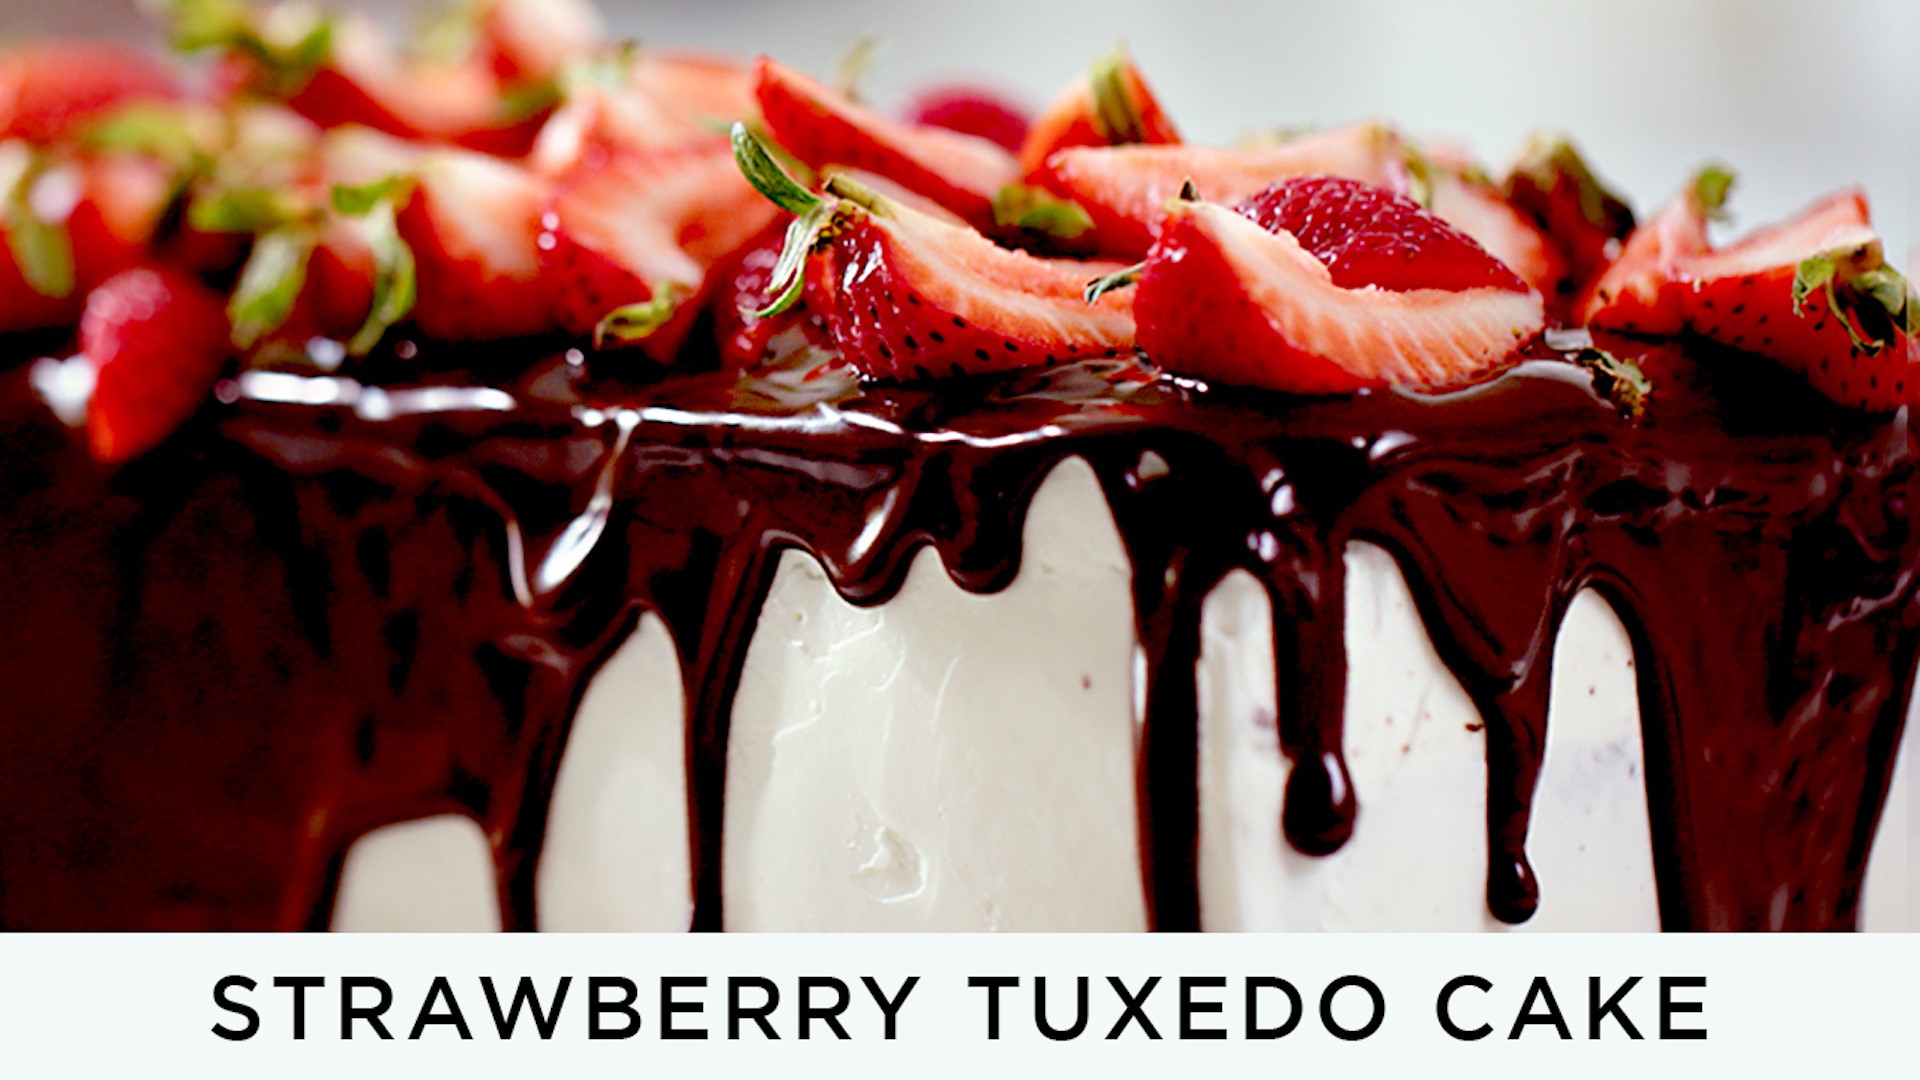 You need this in your life right now! Learn how to make a decadent 4 layered cake covered in chocolate ganache and fresh strawberries